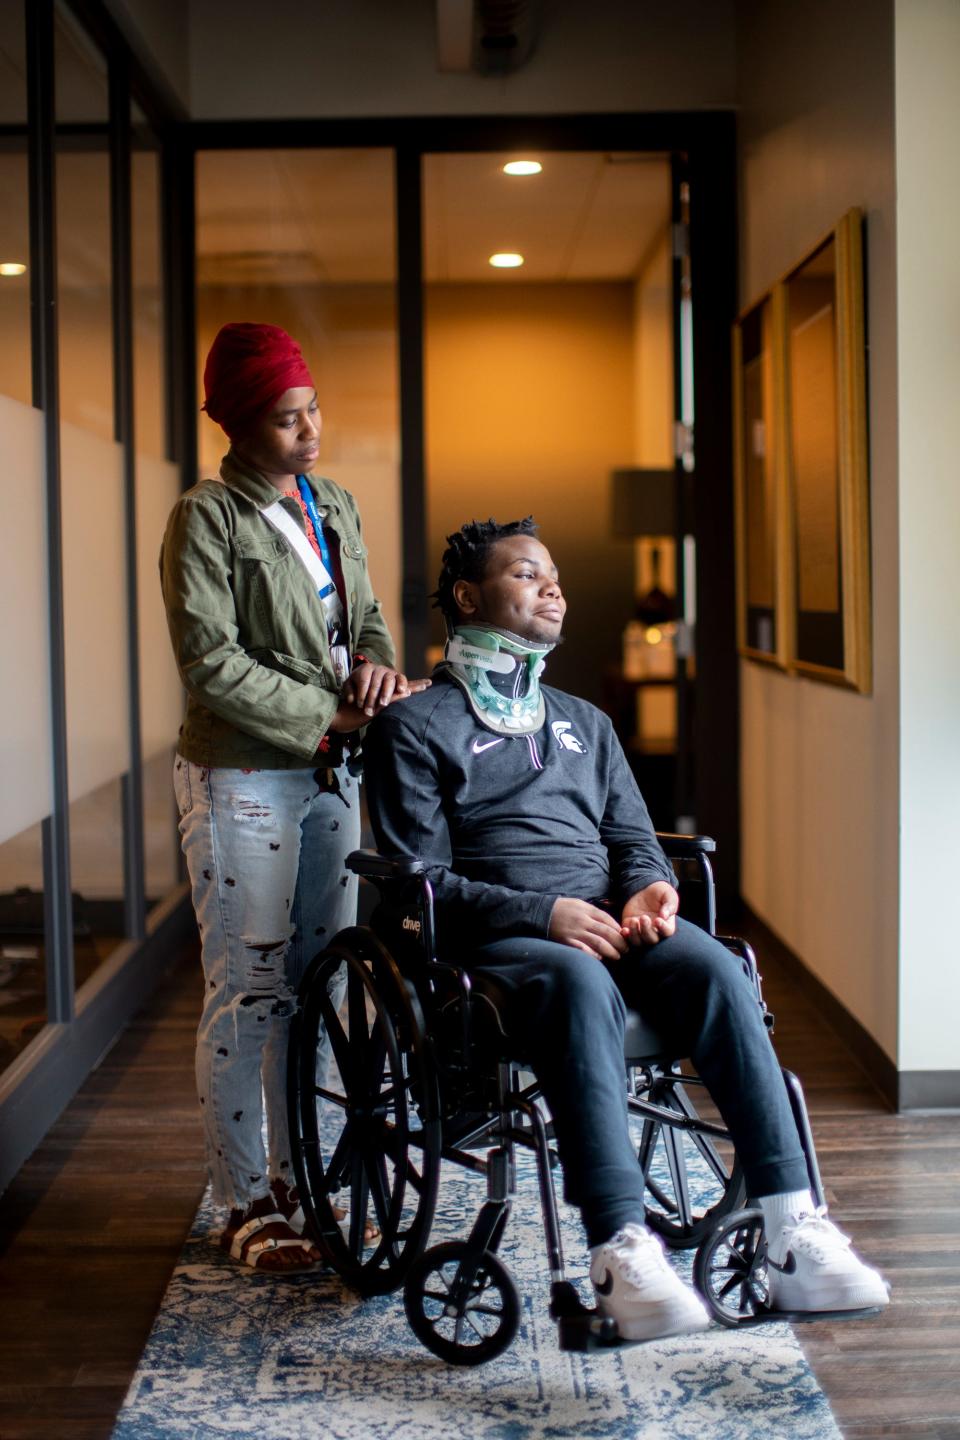 Mary S. Washington with her son Damarion Allen, 15, who was paralyzed from the chest down, on May 7 inside the Franklin County Juvenile Intervention Center.